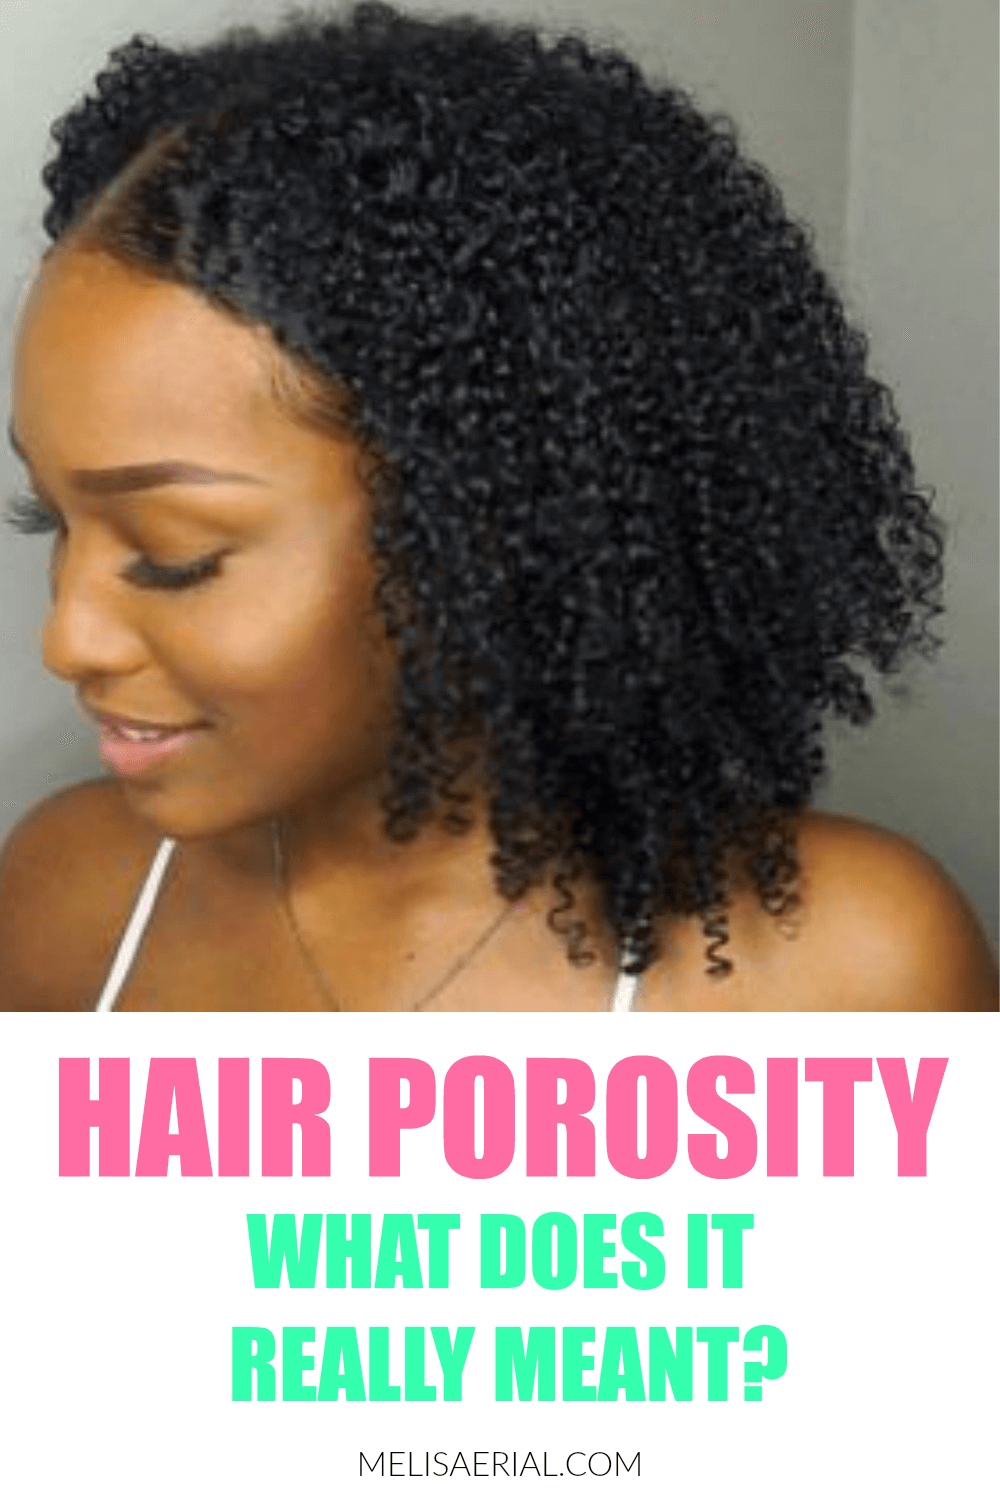 Hair Porosity: Find Out If You Have Low, Normal or High